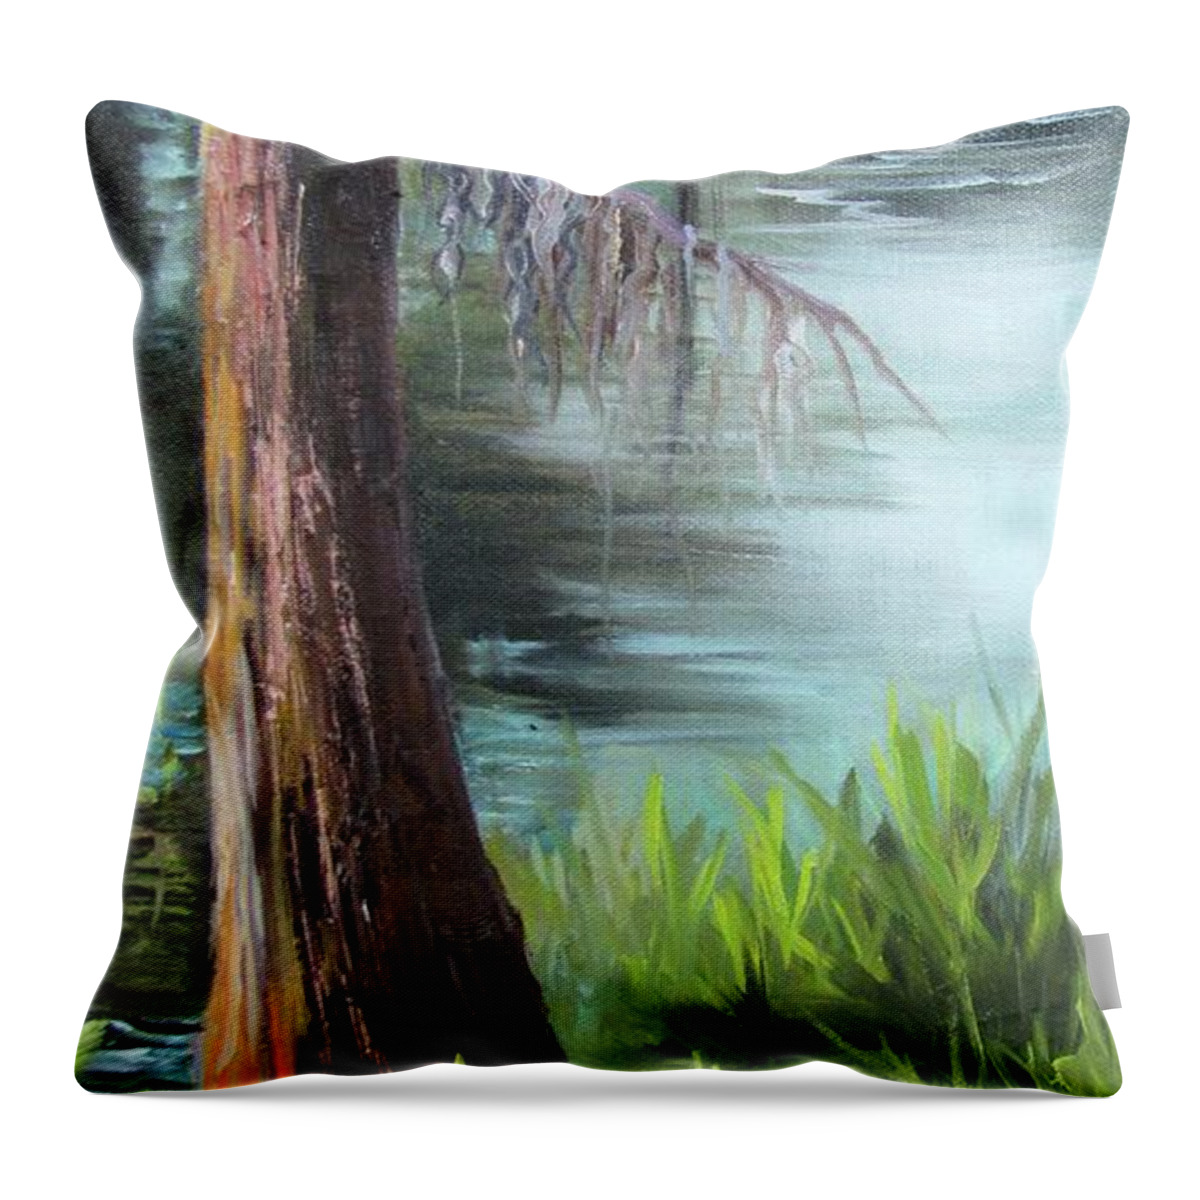 Cypress Throw Pillow featuring the painting Cypress Up Close by Barbara Haviland